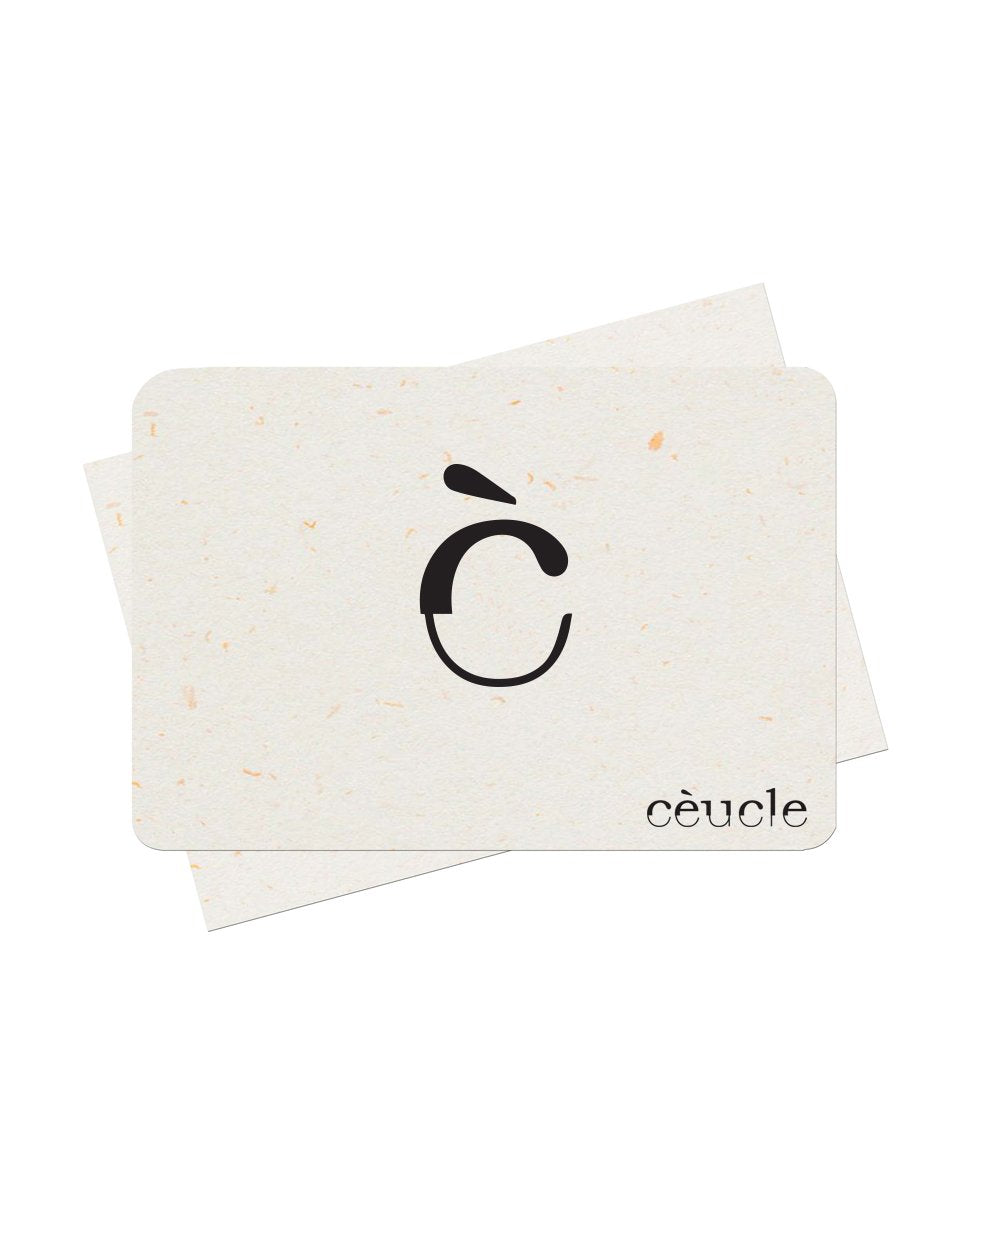 Ceucle gift card